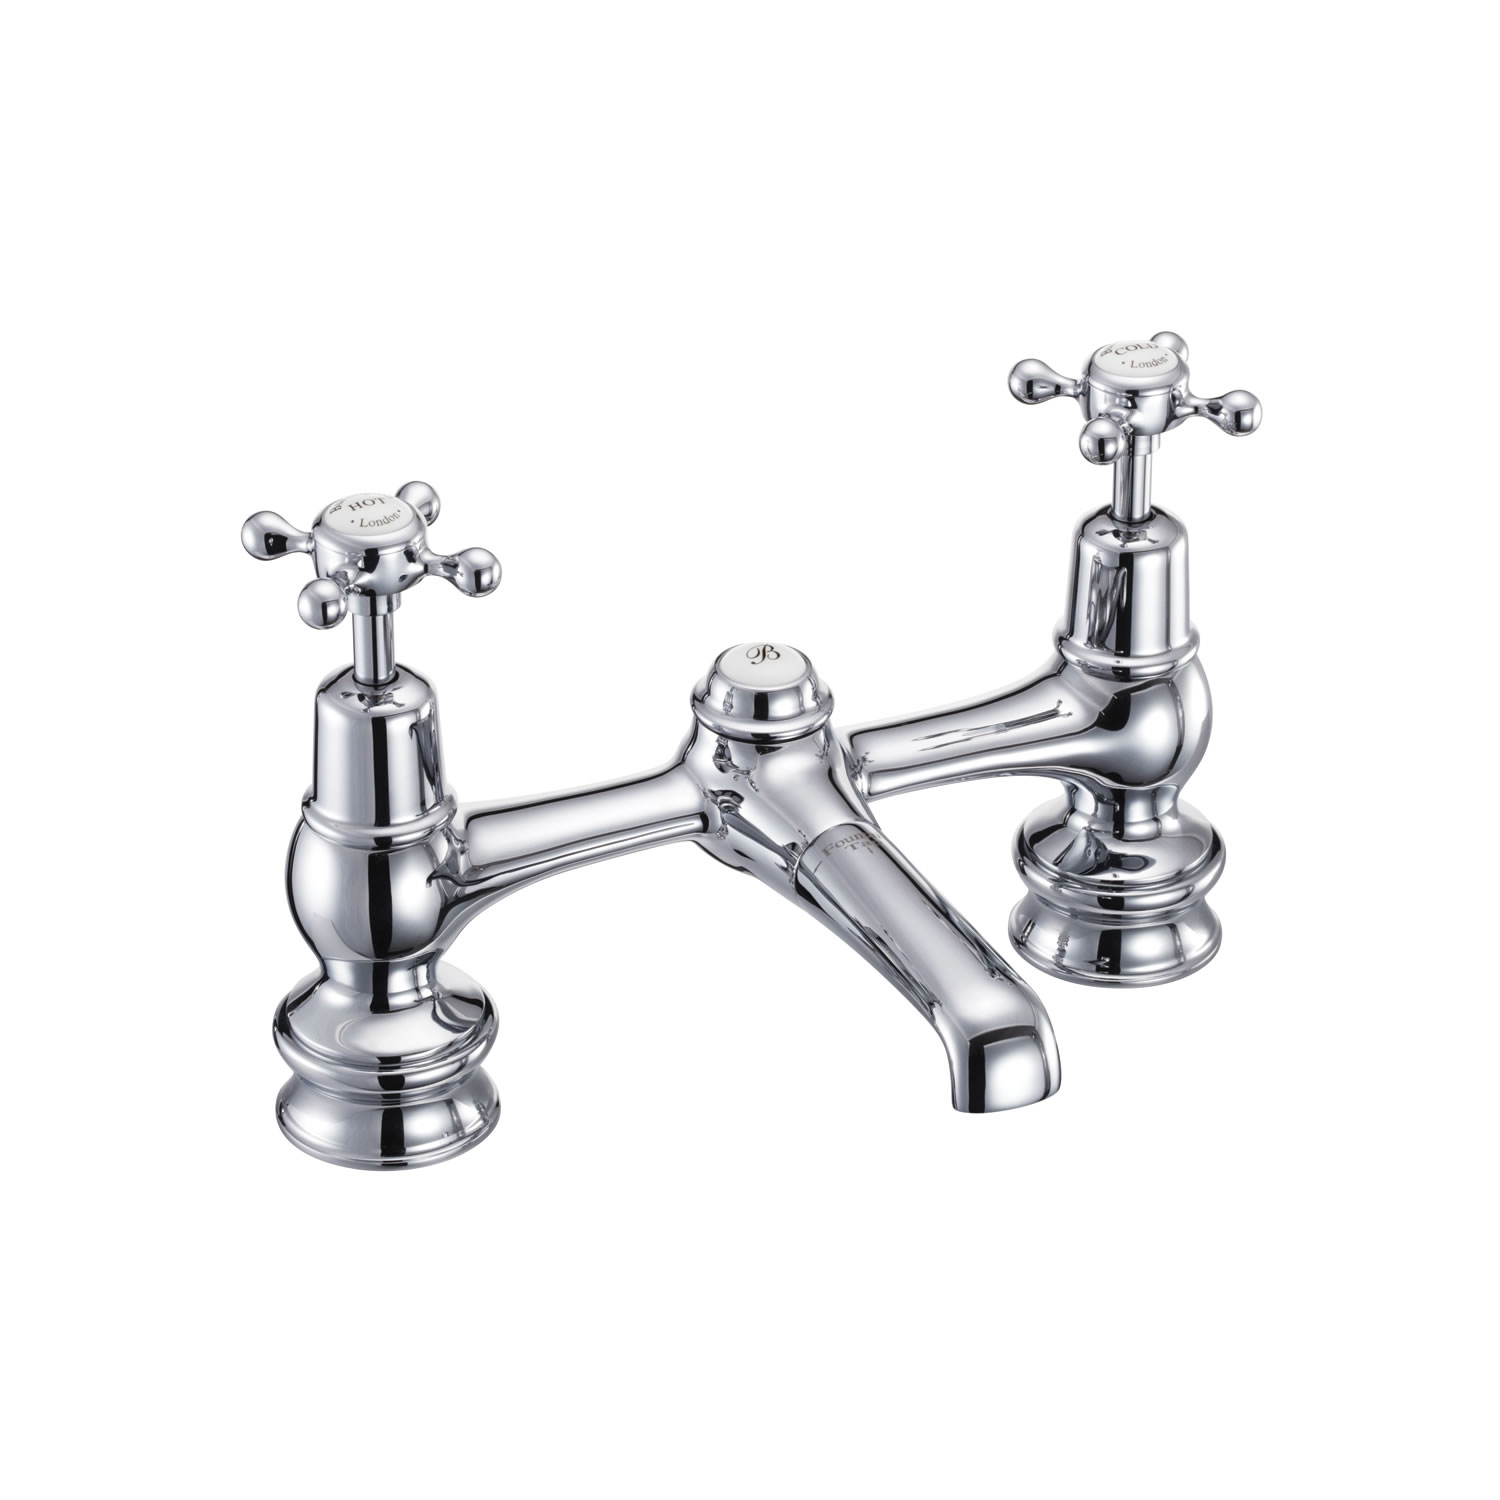 Claremont Regent 2 tap hole bridge basin mixer with low central indice with plug and chain waste with swivel spout